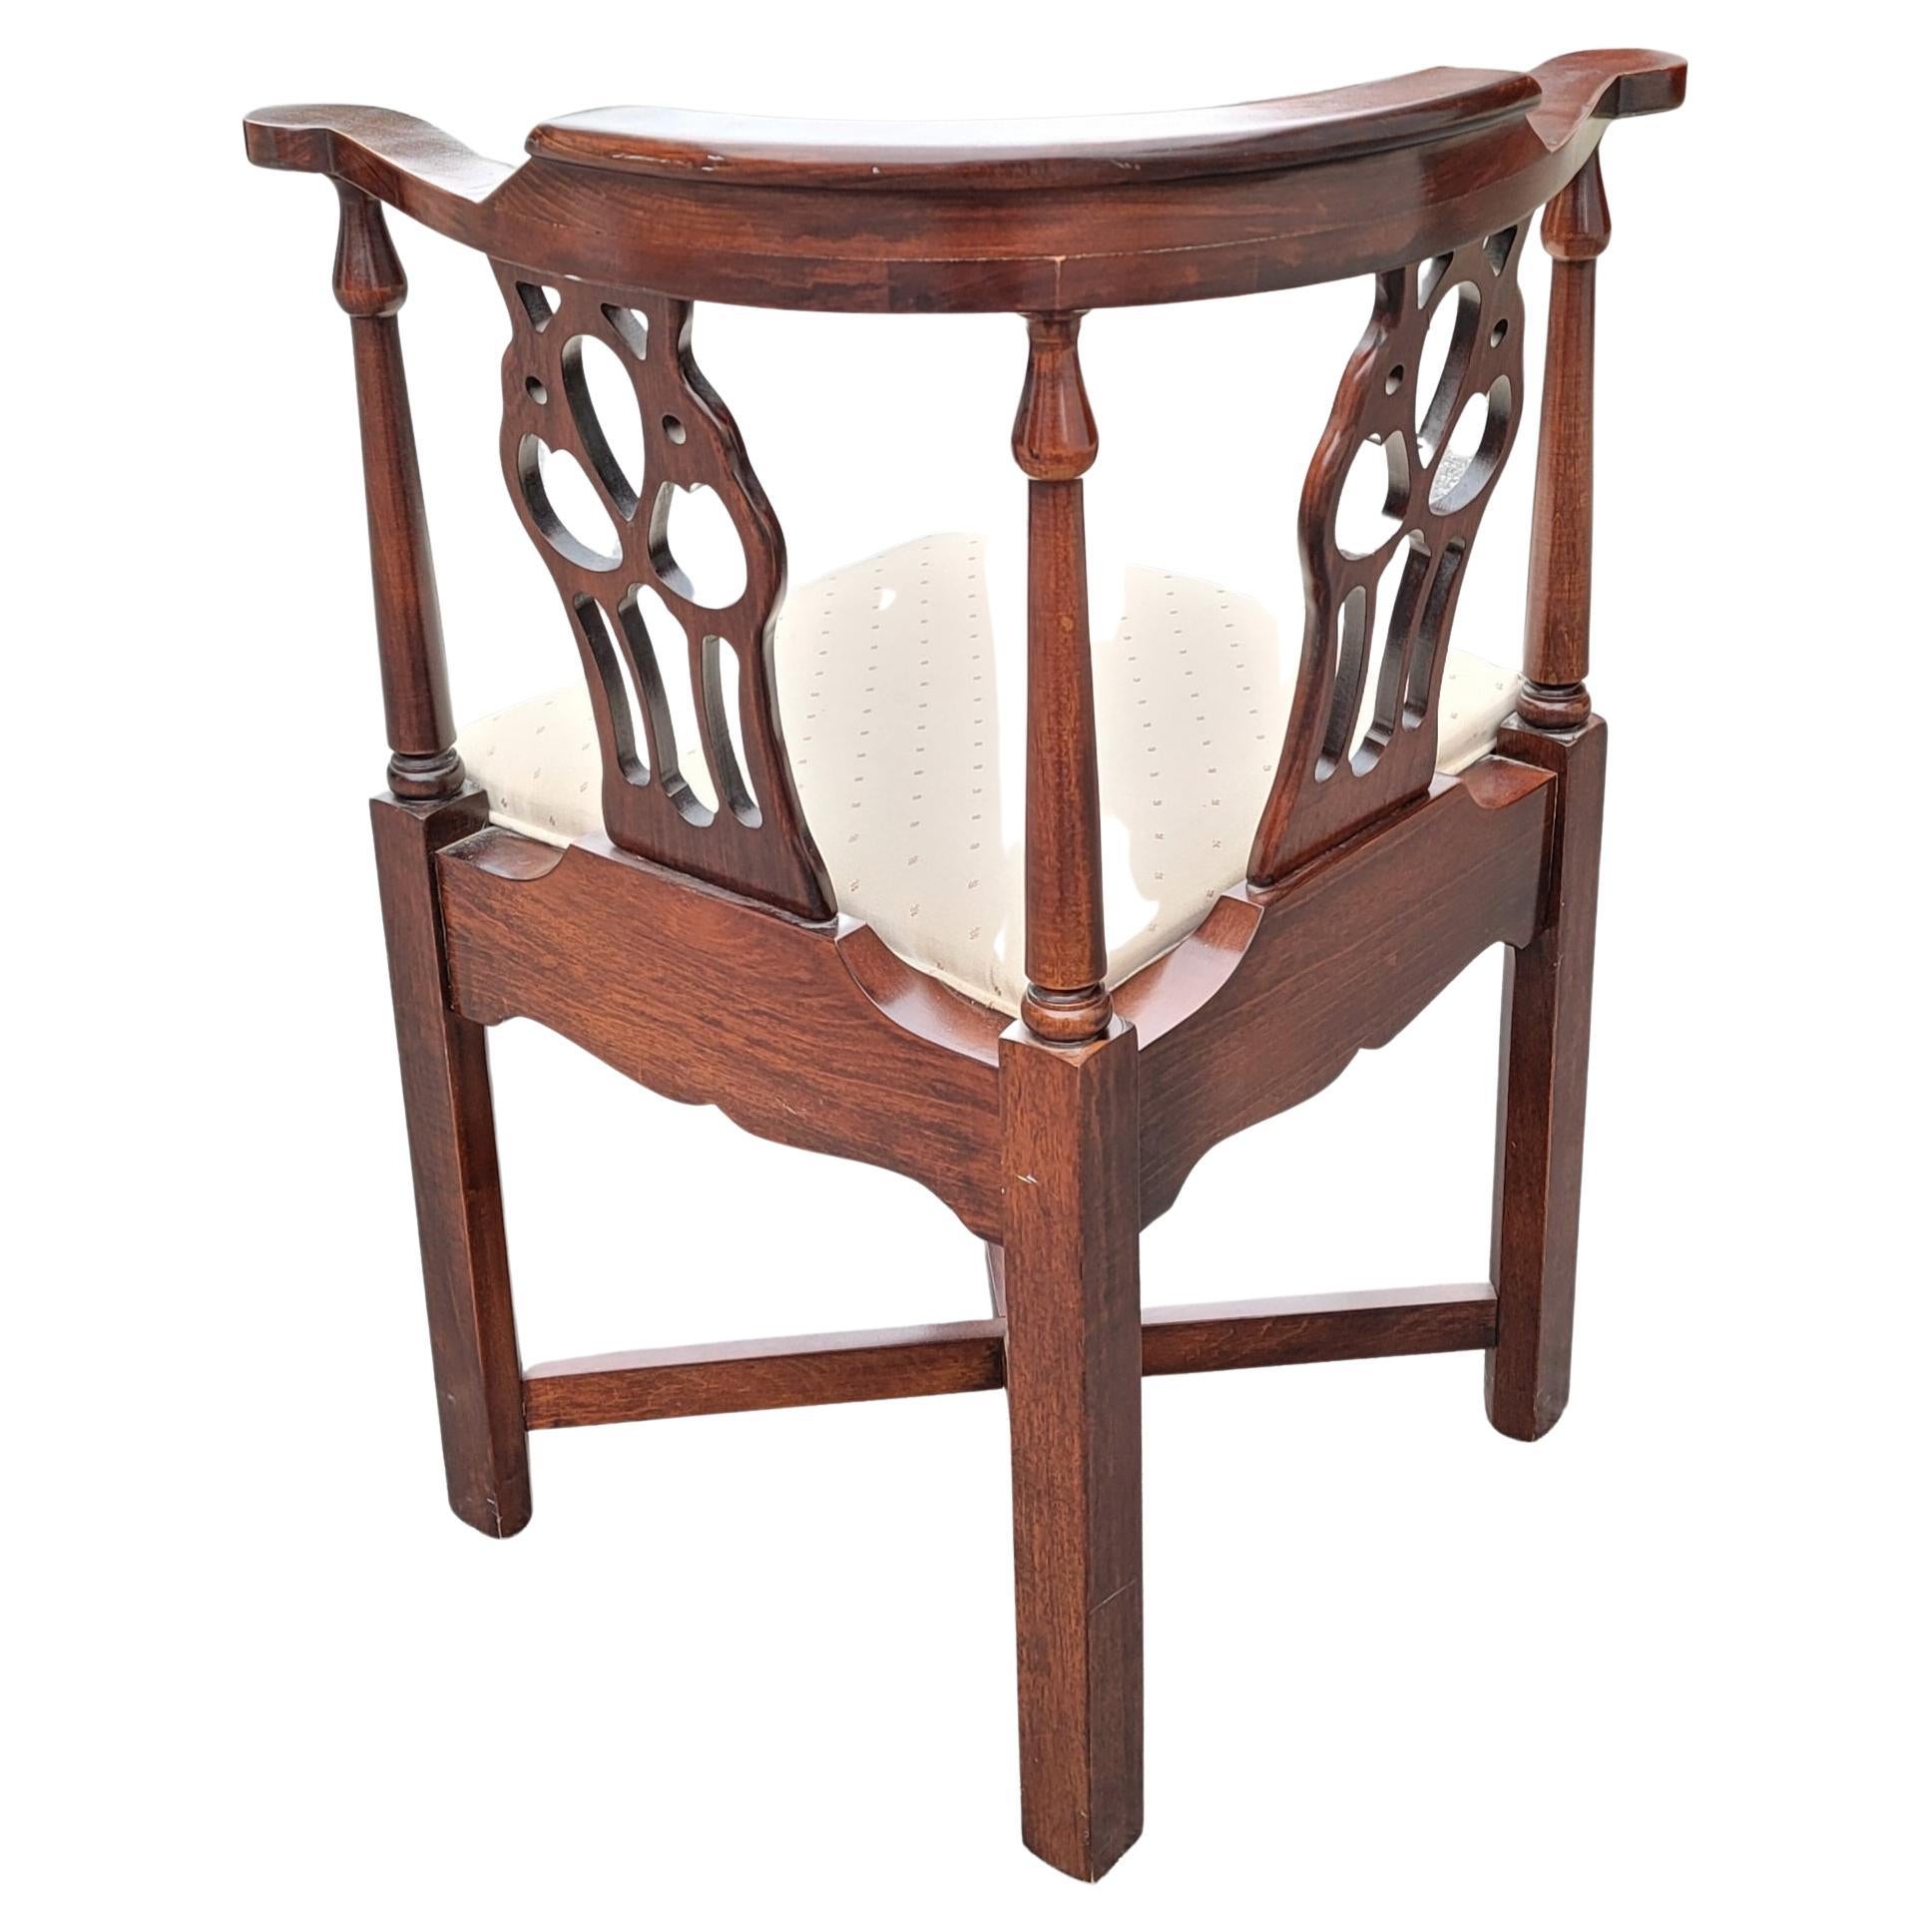 English George III Mahogany Upholstered Corner Chair In Good Condition For Sale In Germantown, MD